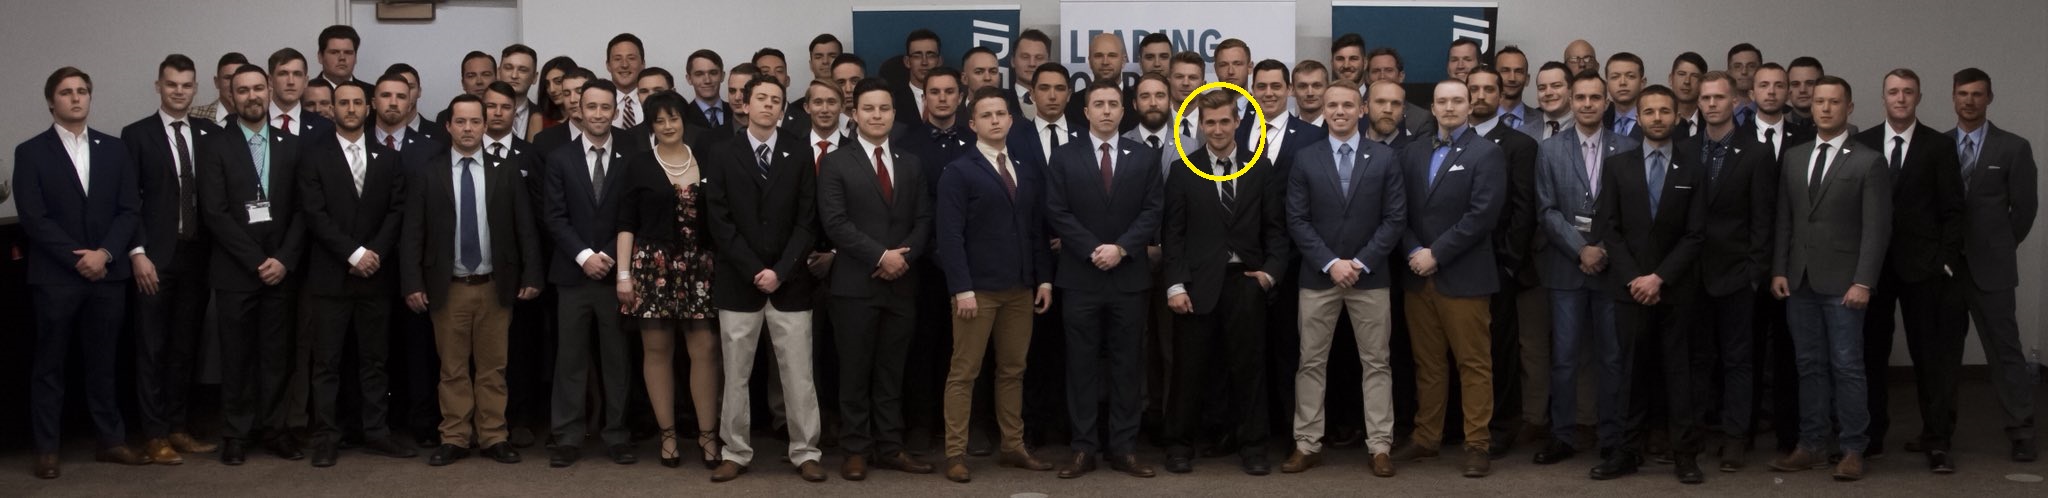 Identity Evropa 2018 conference cooper circled